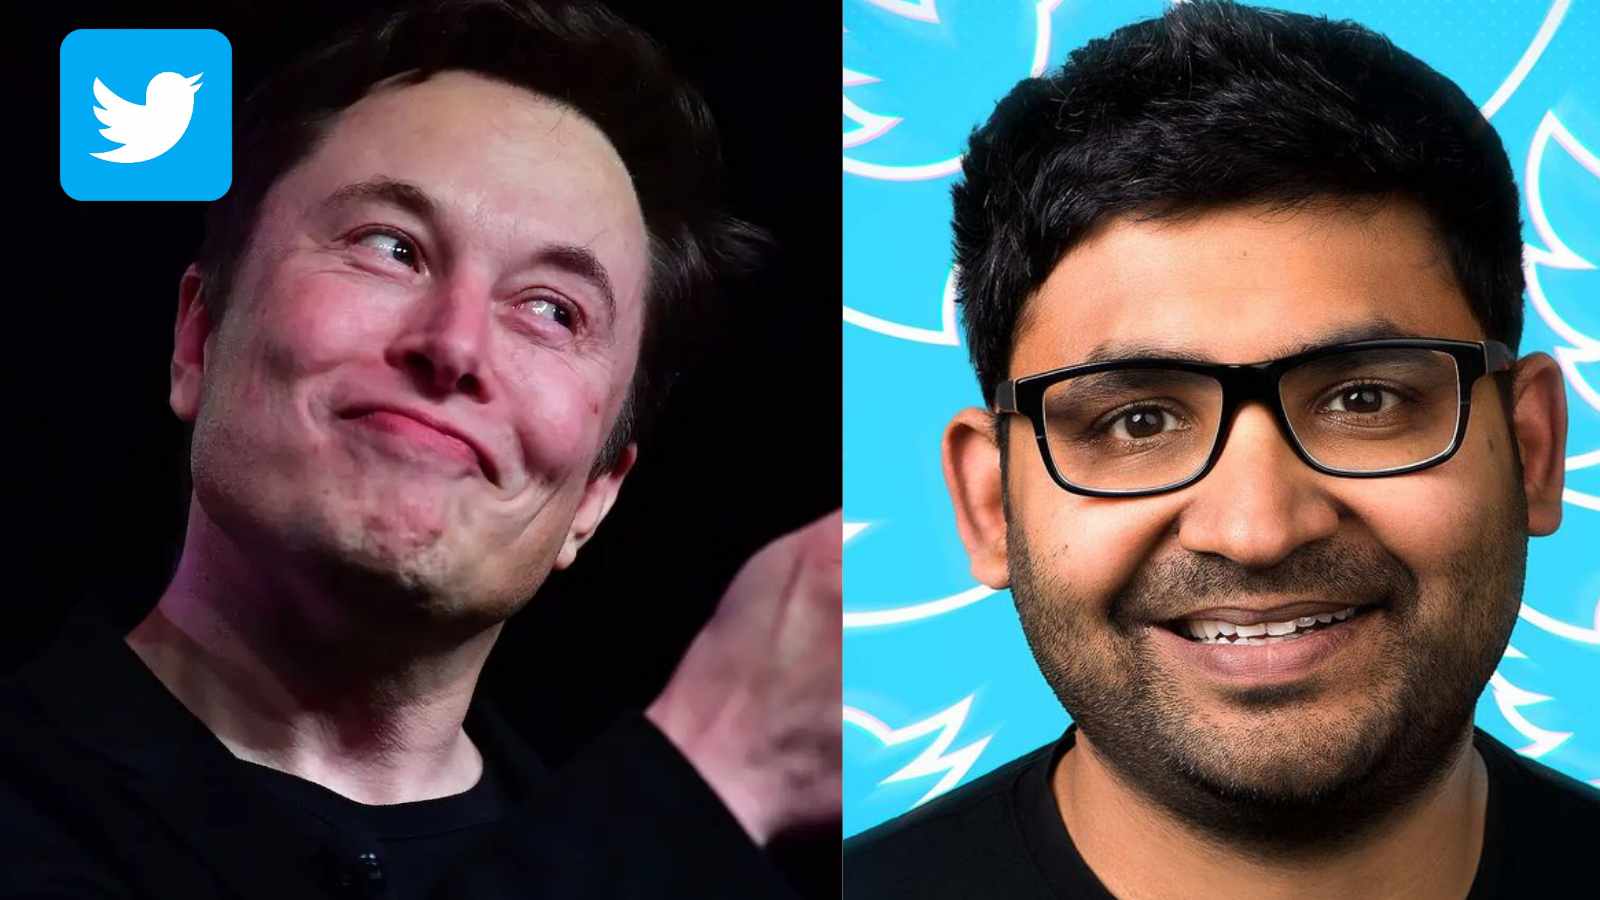 Elon Musk and Twitter CEO Parag Agrawal